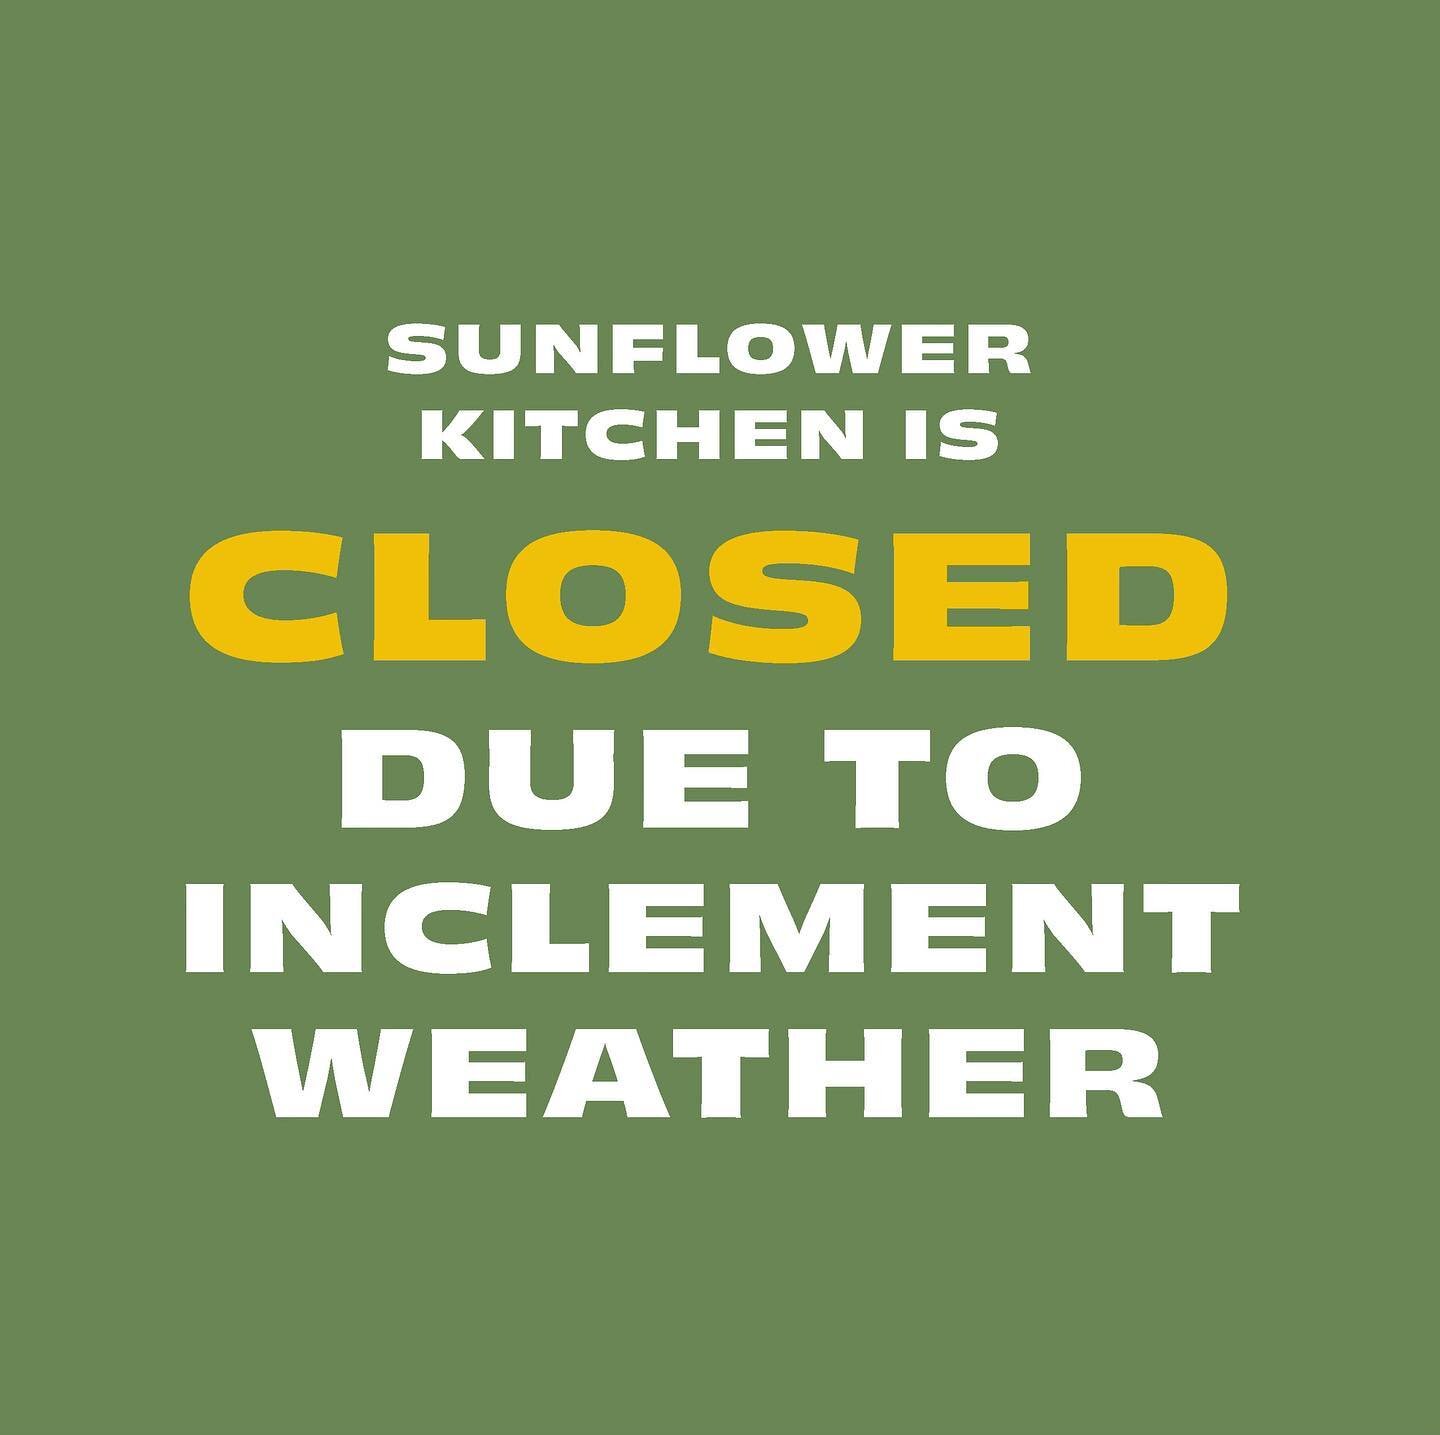 🌻 Our kitchen will be CLOSED today due to the weather 🌧 However, the @oklawahabrewing tap room will remain OPEN 🍺 Be safe out there!